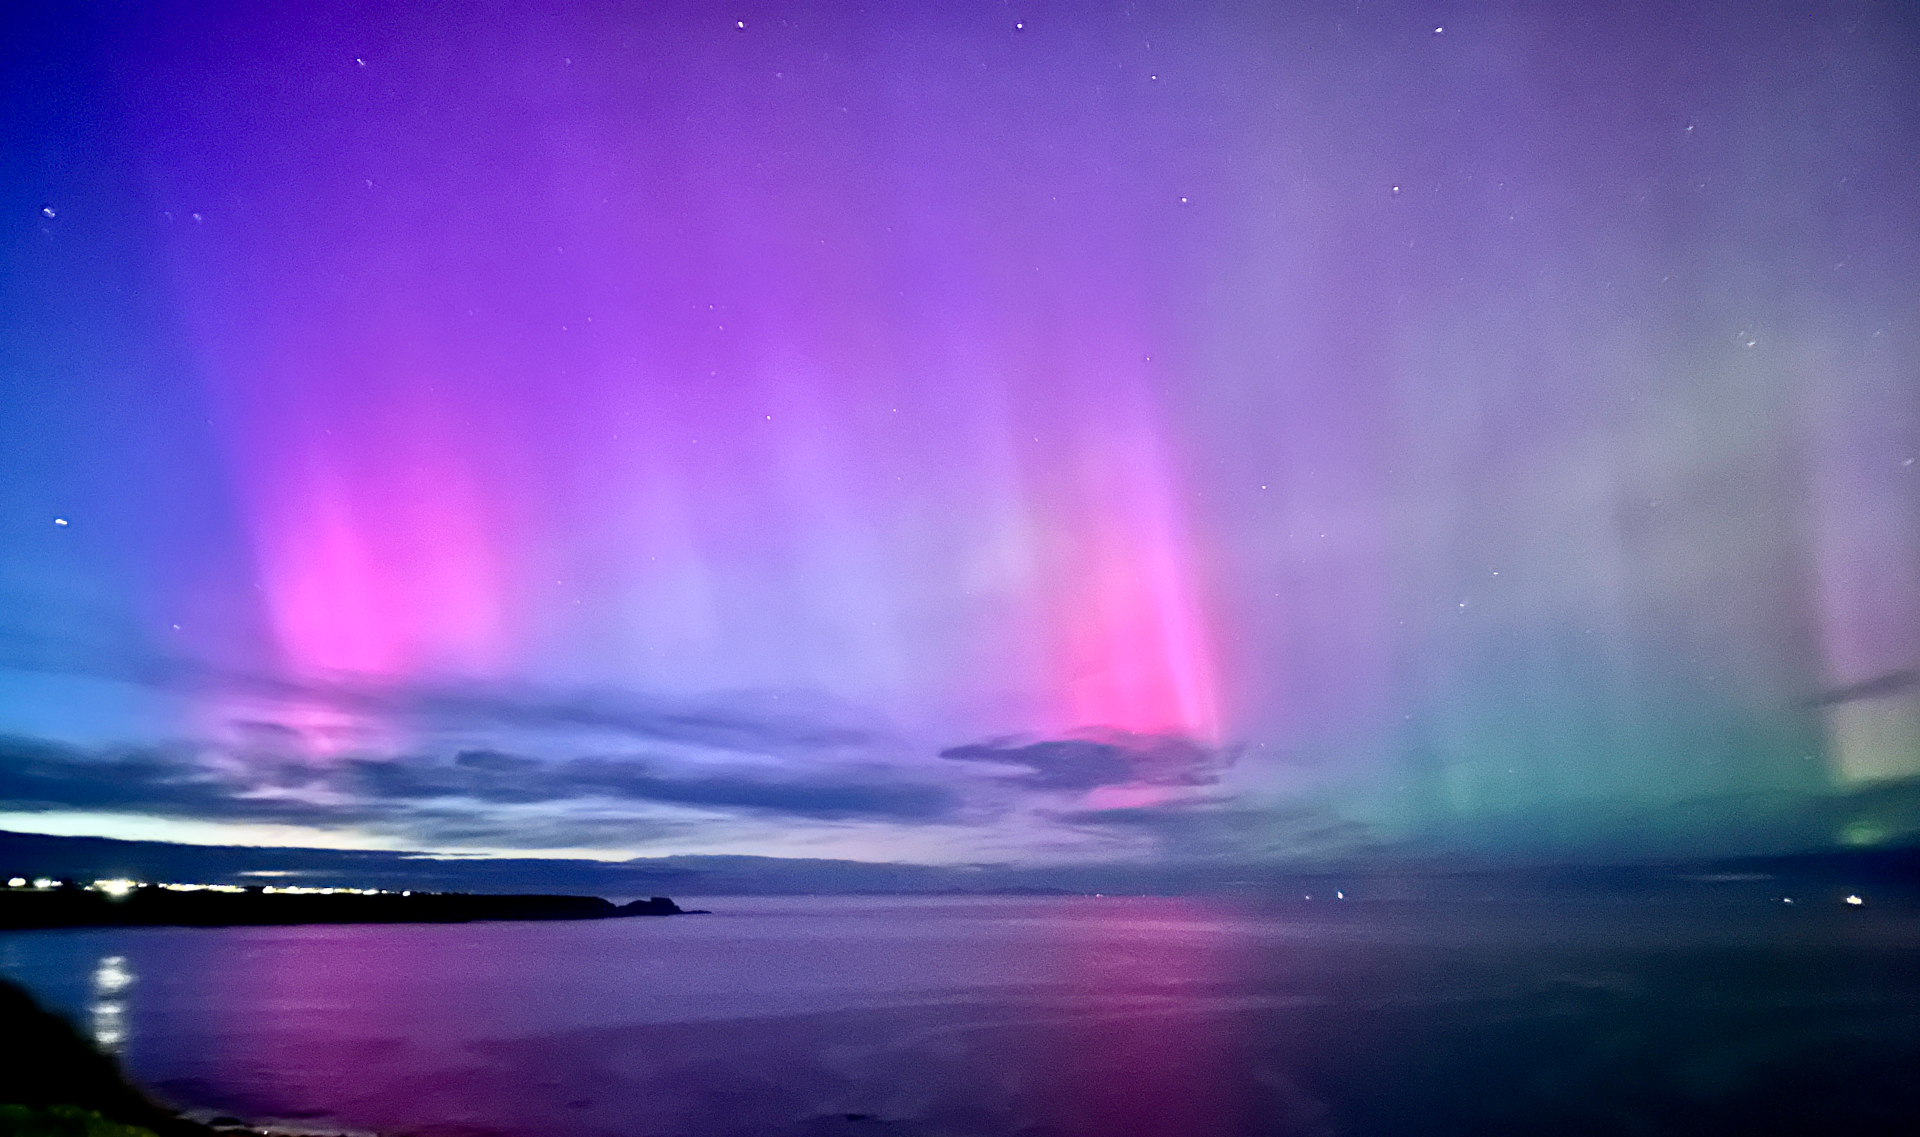 Bright pink and green auroras appear like a curtain of light over a large body of water.